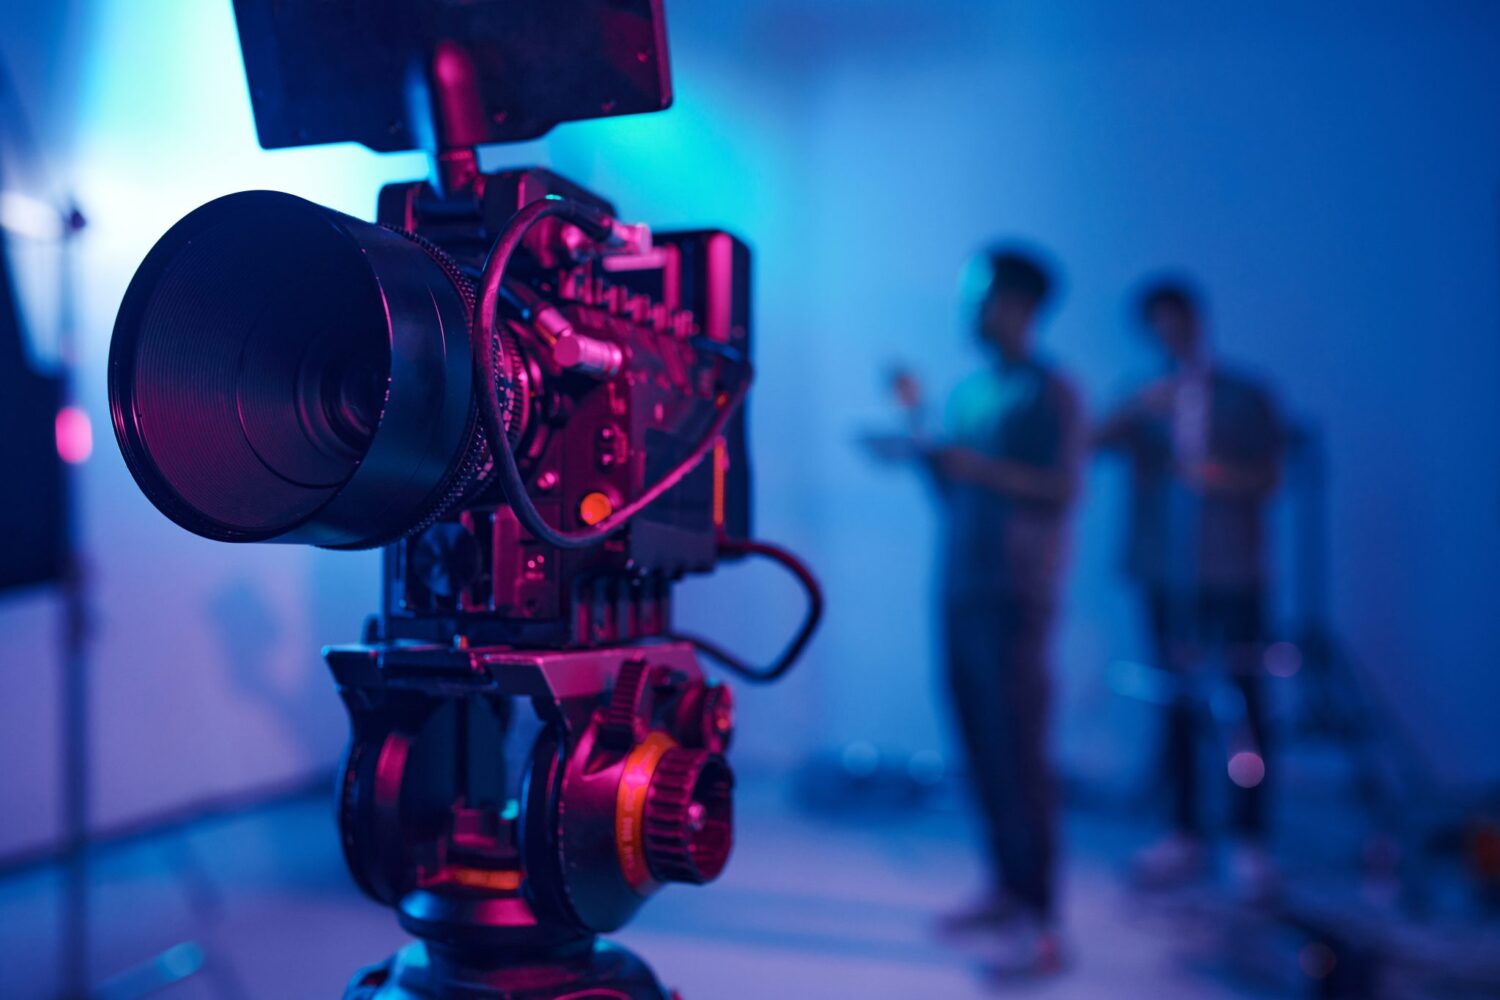 professional-camera-for-professional-shooting-film-industry-accounting-challenges-fusion-cpa